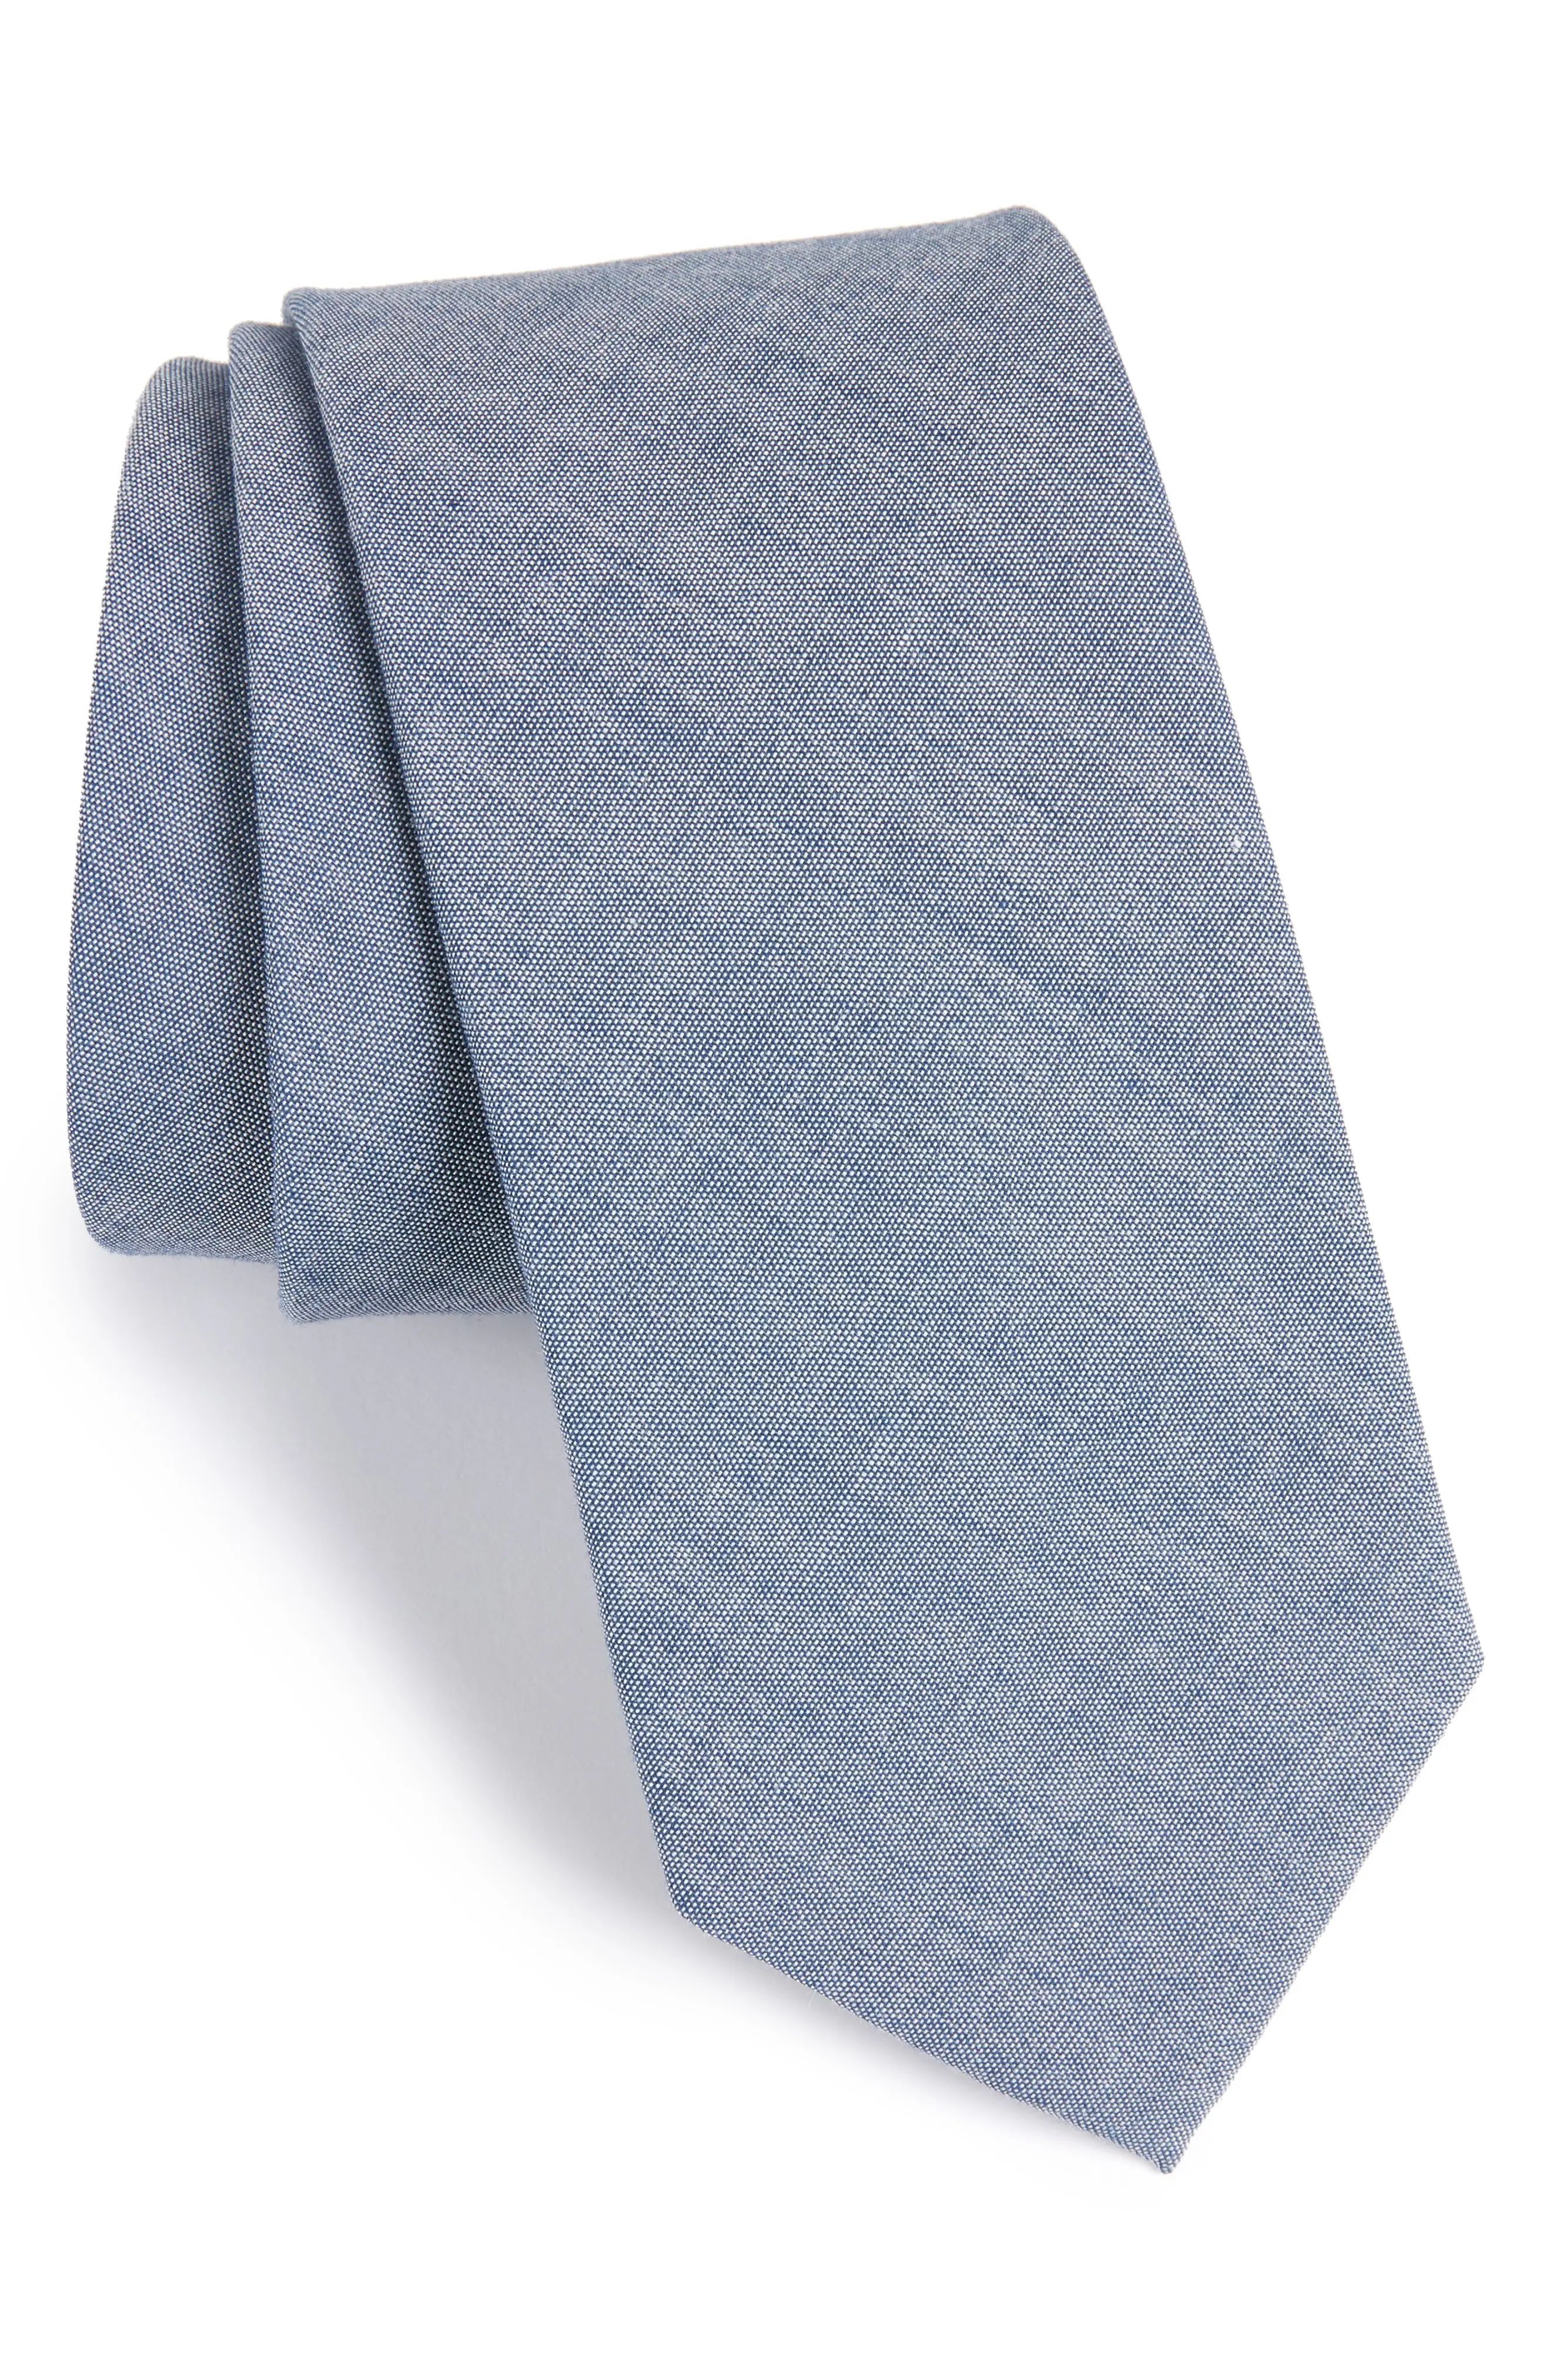 Classic Chambray Cotton Tie | Nordstrom